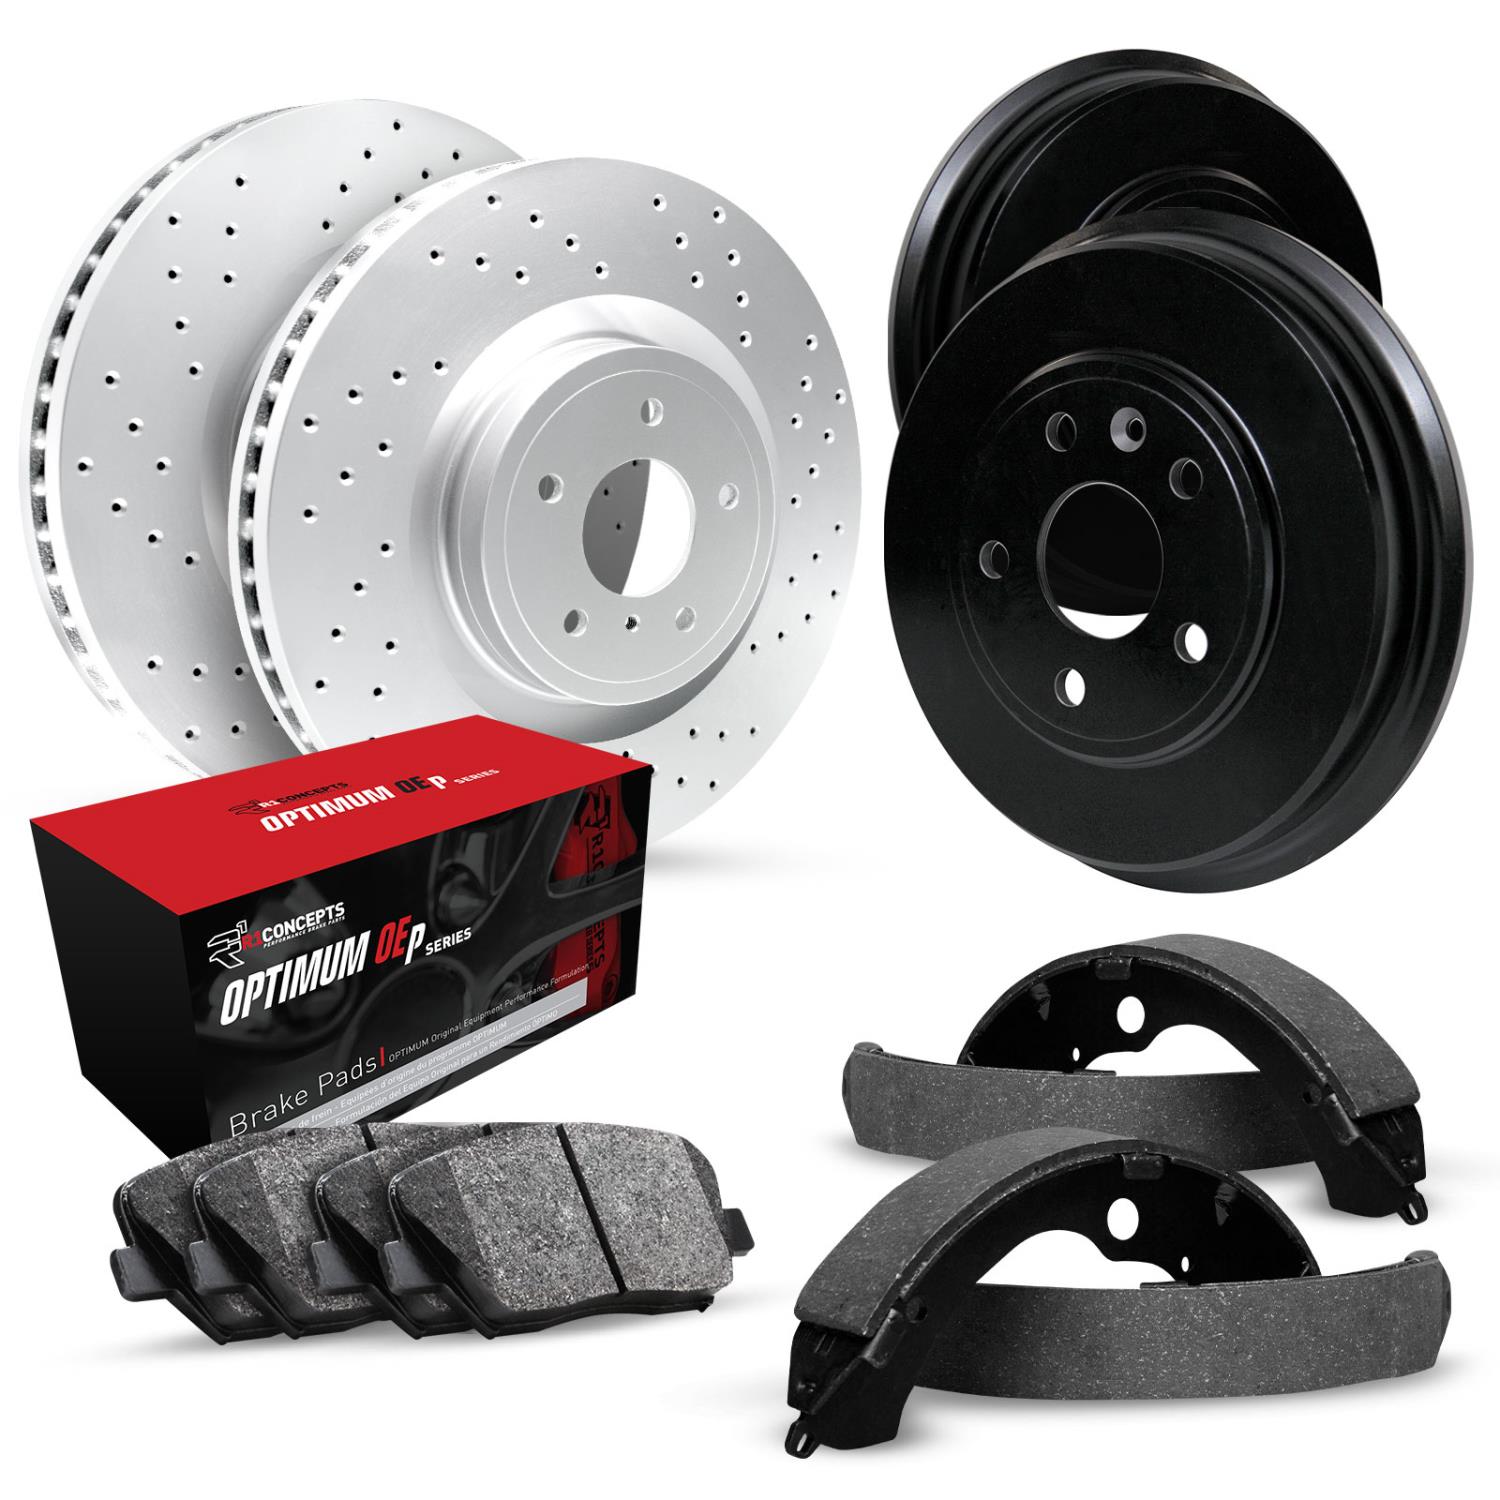 GEO-Carbon Drilled Brake Rotor & Drum Set w/Optimum OE Pads & Shoes, 1971-1976 GM, Position: Front & Rear